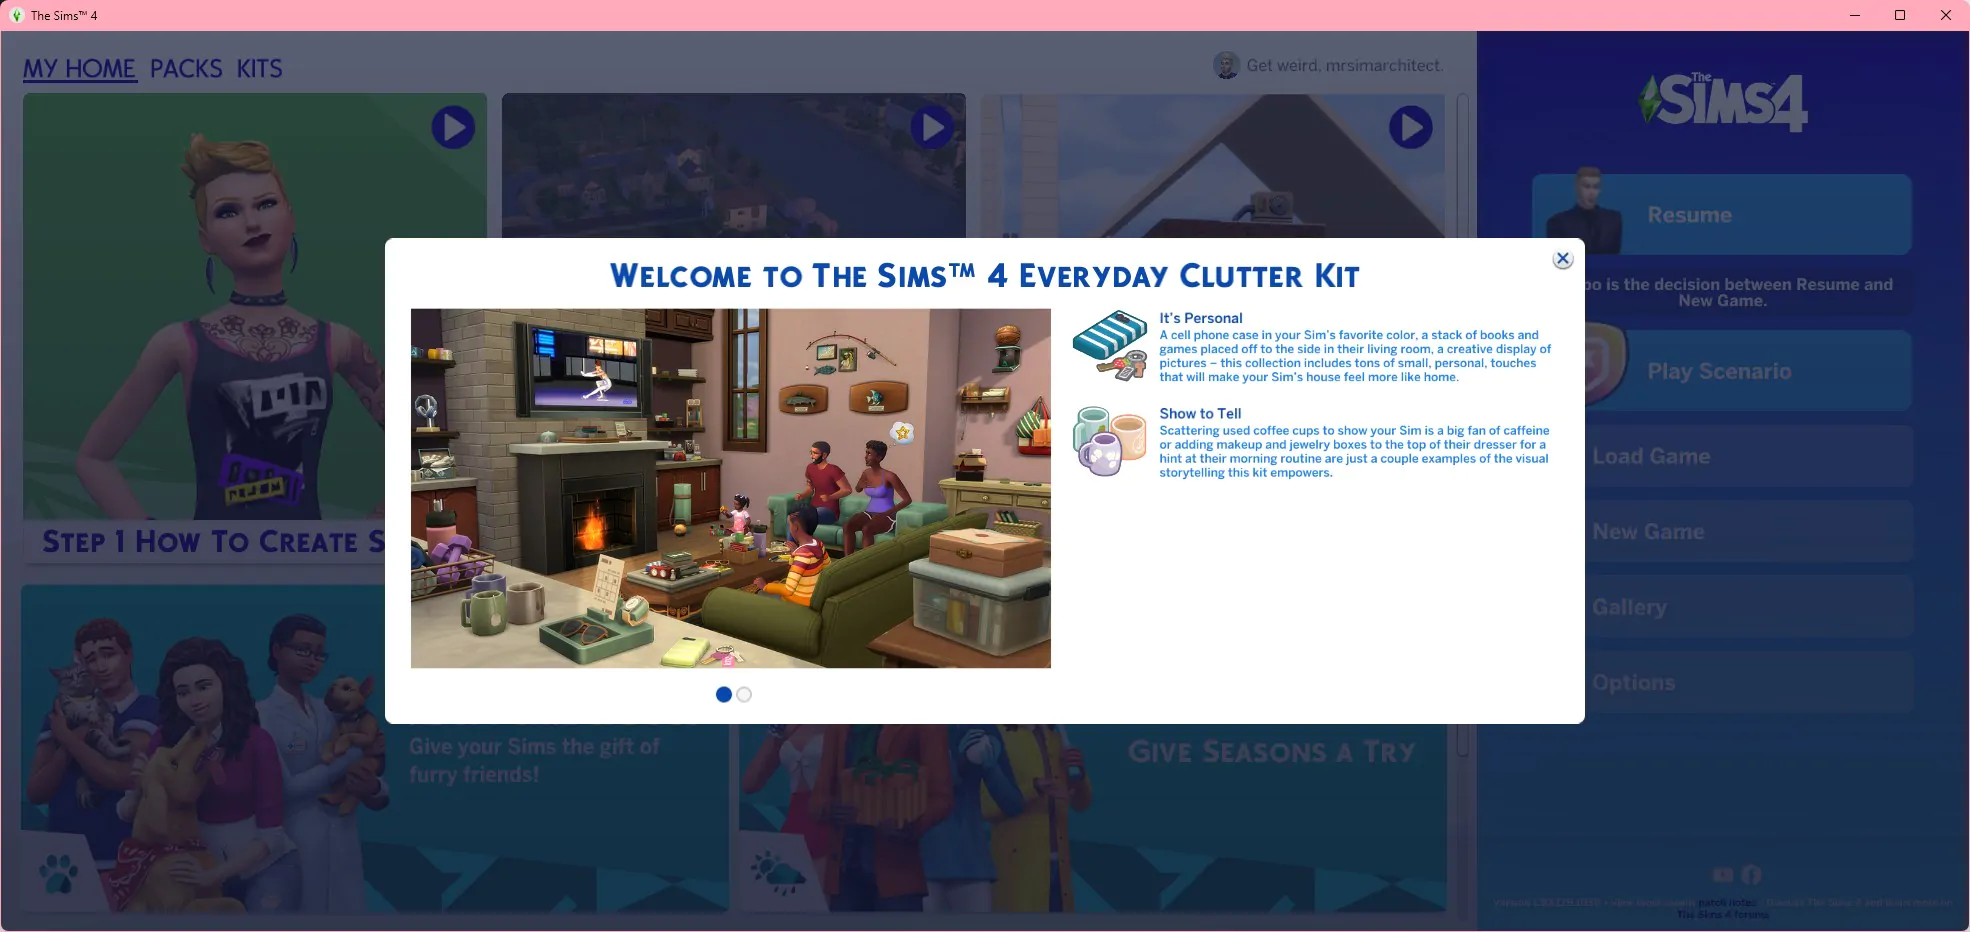 The Sims 4 Everyday Clutter Kit Pack - Welcome Notification that lets you know the pack is properly installed.